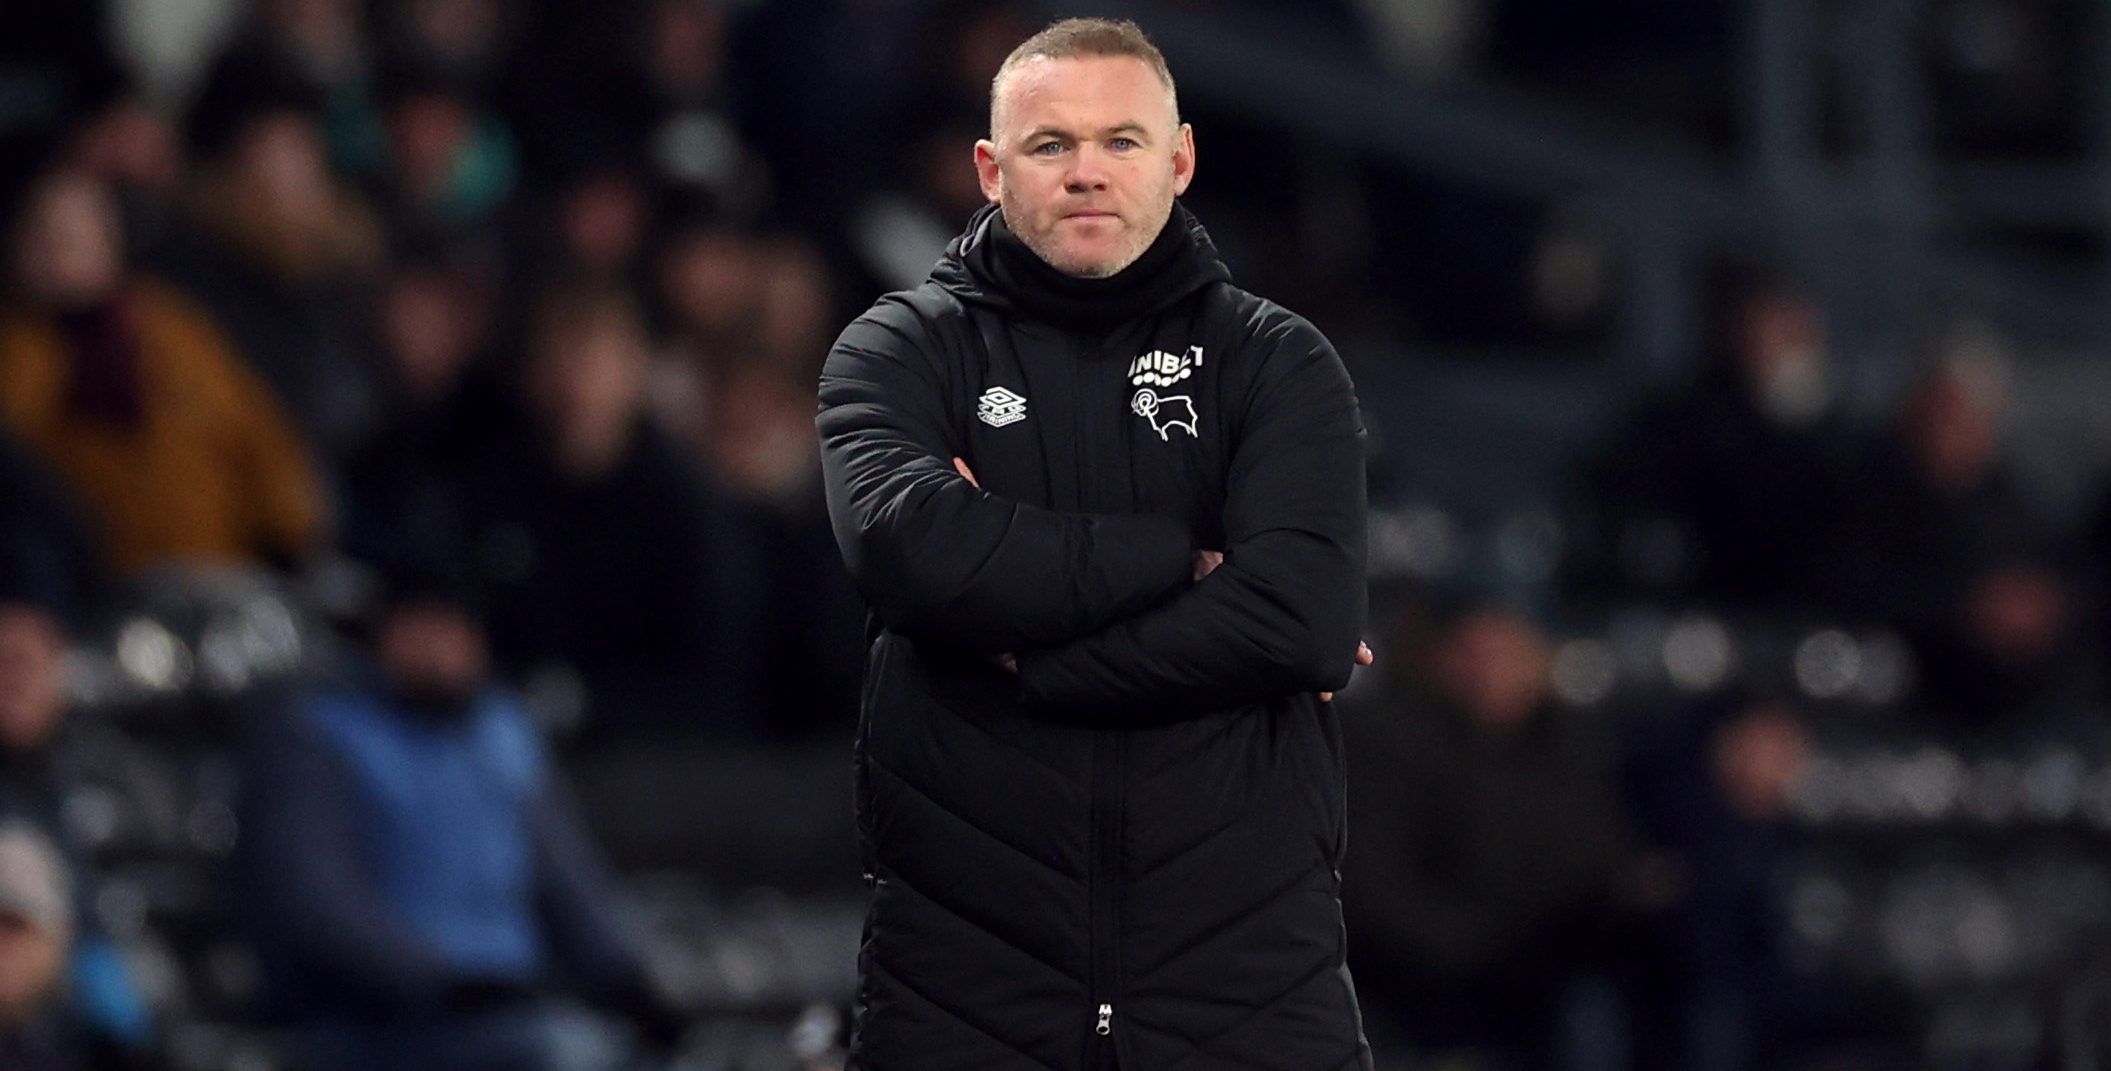 Soccer Football - Championship - Derby County v Queens Park Rangers - Pride Park, Derby, Britain - November 29, 2021 Derby County manager Wayne Rooney Action Images/Carl Recine